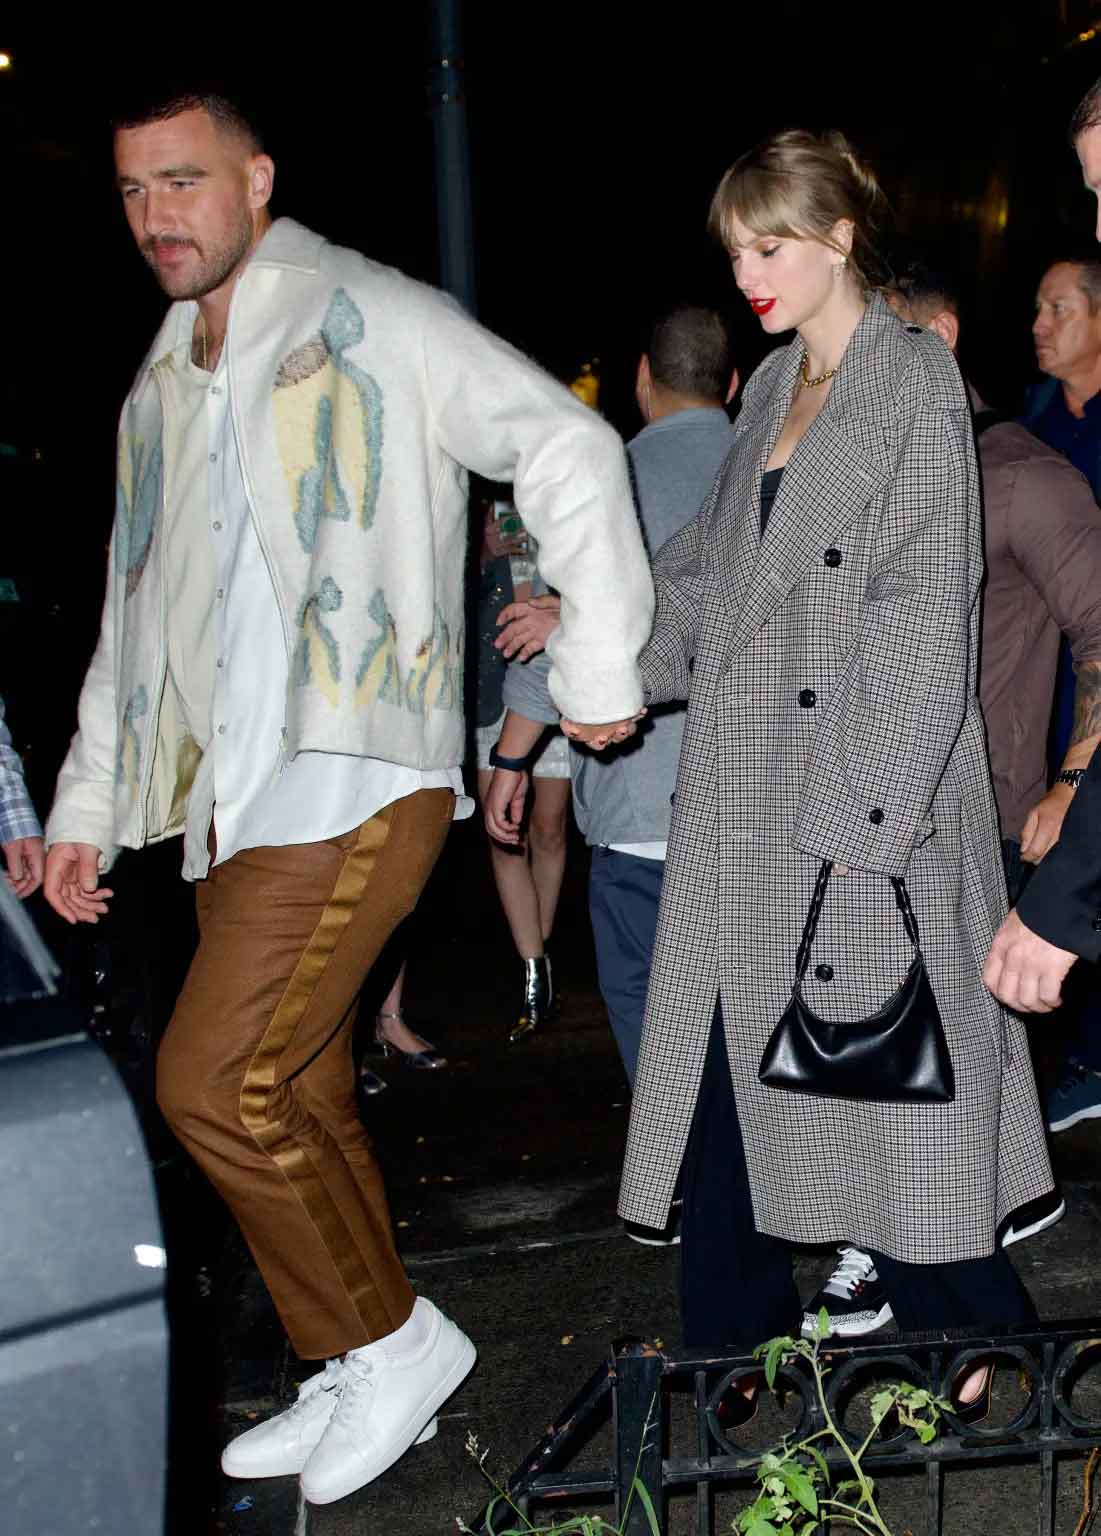 Taylor Swift and Tarvis Kelce first sighting while holding hands